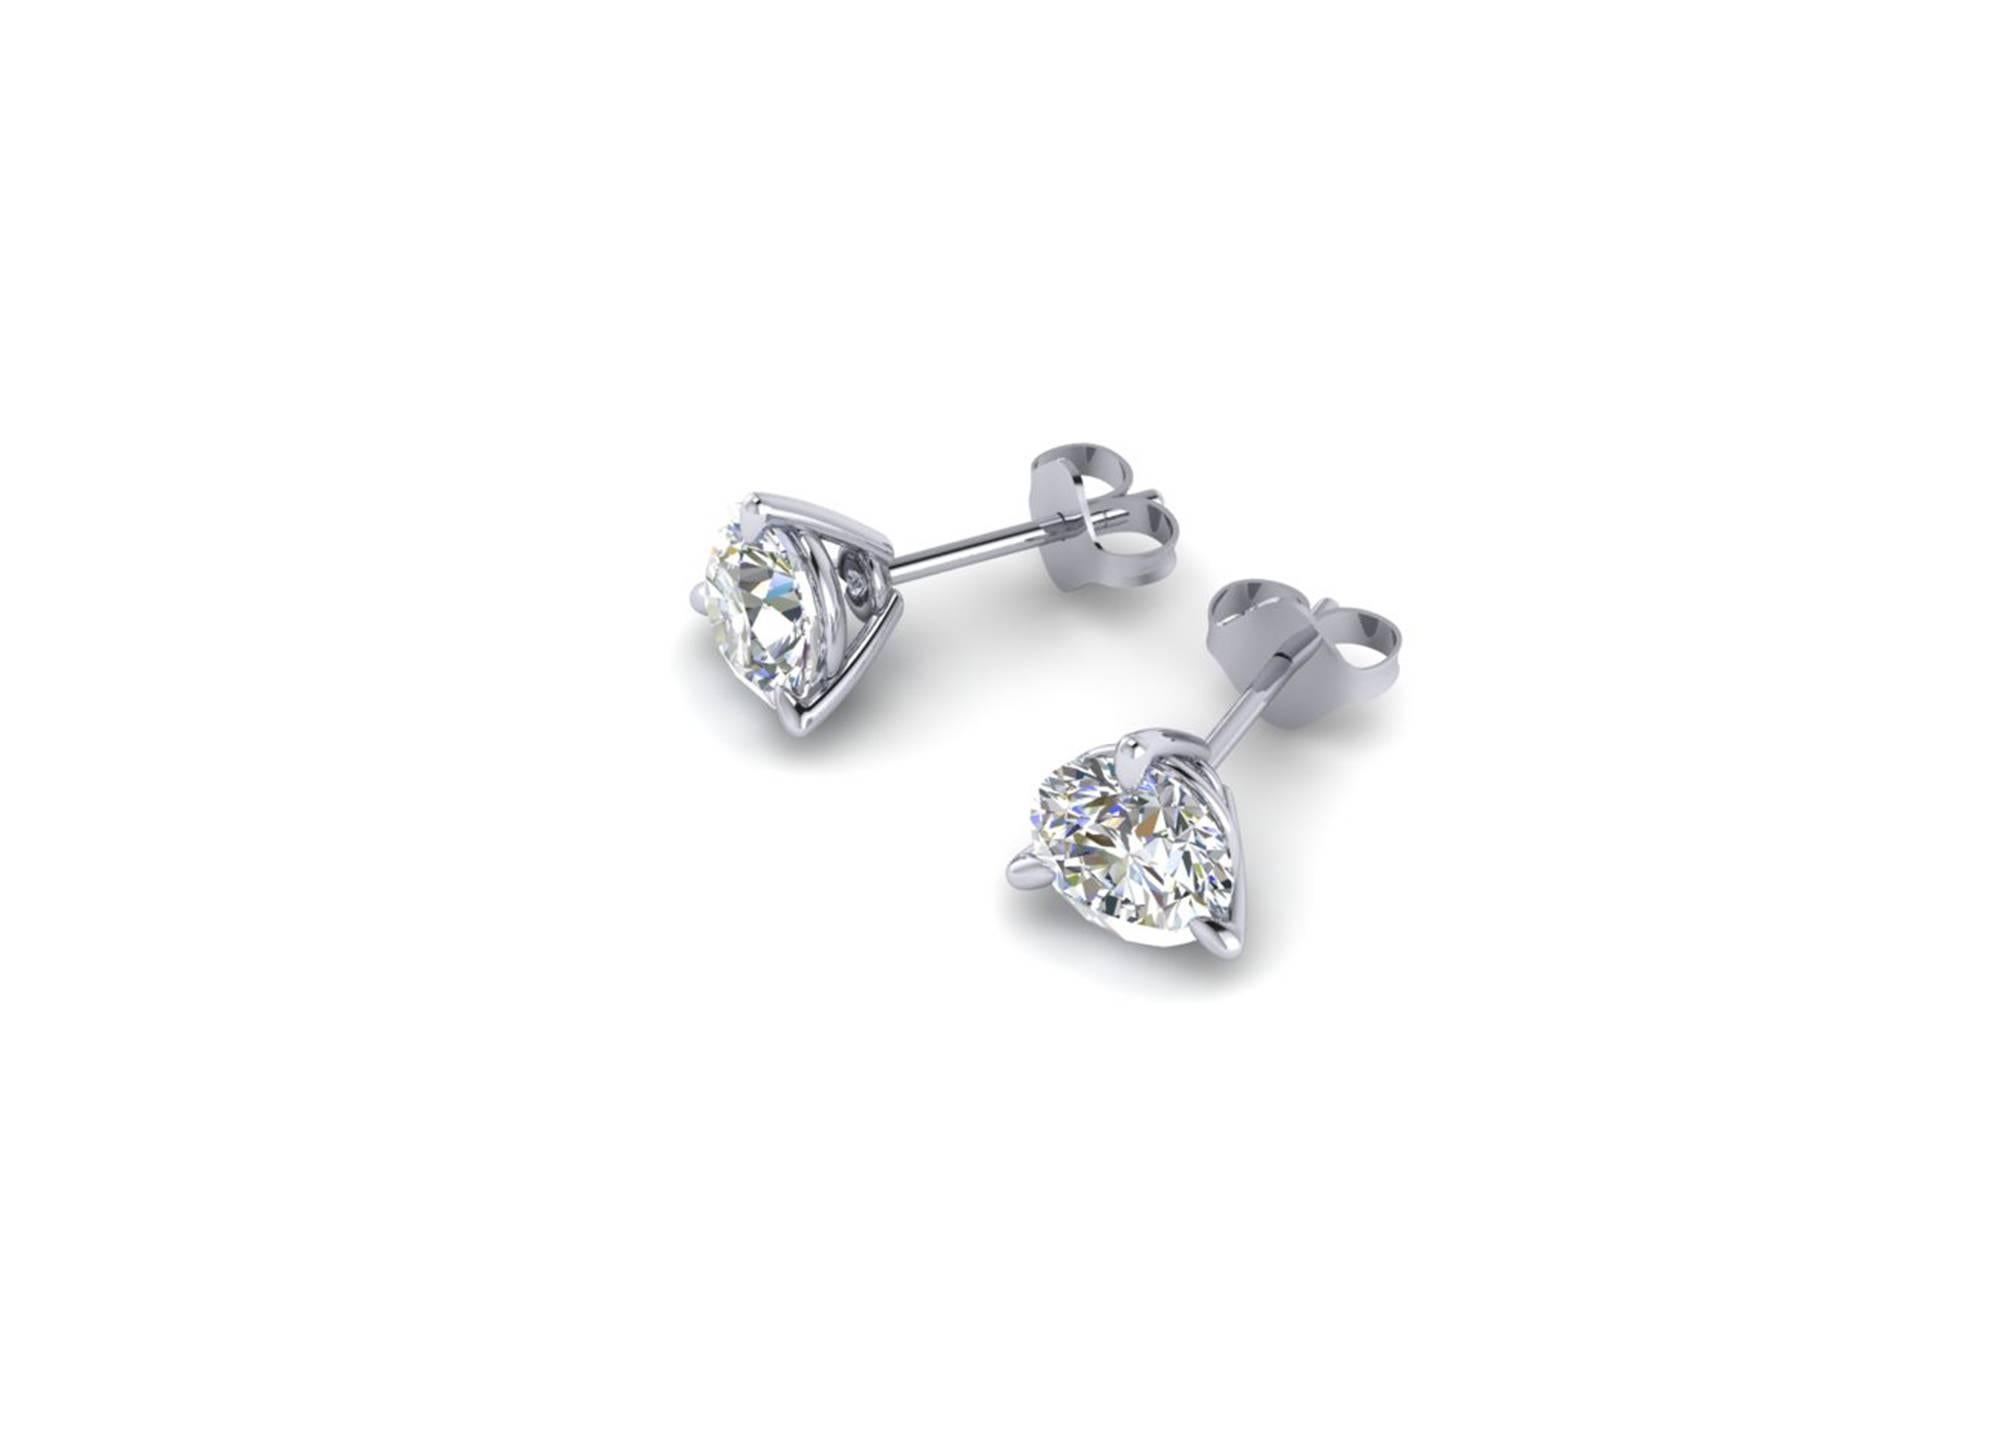 Ferrucci GIA Certified 1.92 carats of spectacular D color diamonds, IF clarity (internally flawless), triple Excellent specs and No Fluorescence, each diamond of 0.96 carats, set in hand made Martini style ear-studs, made in New York by Italian